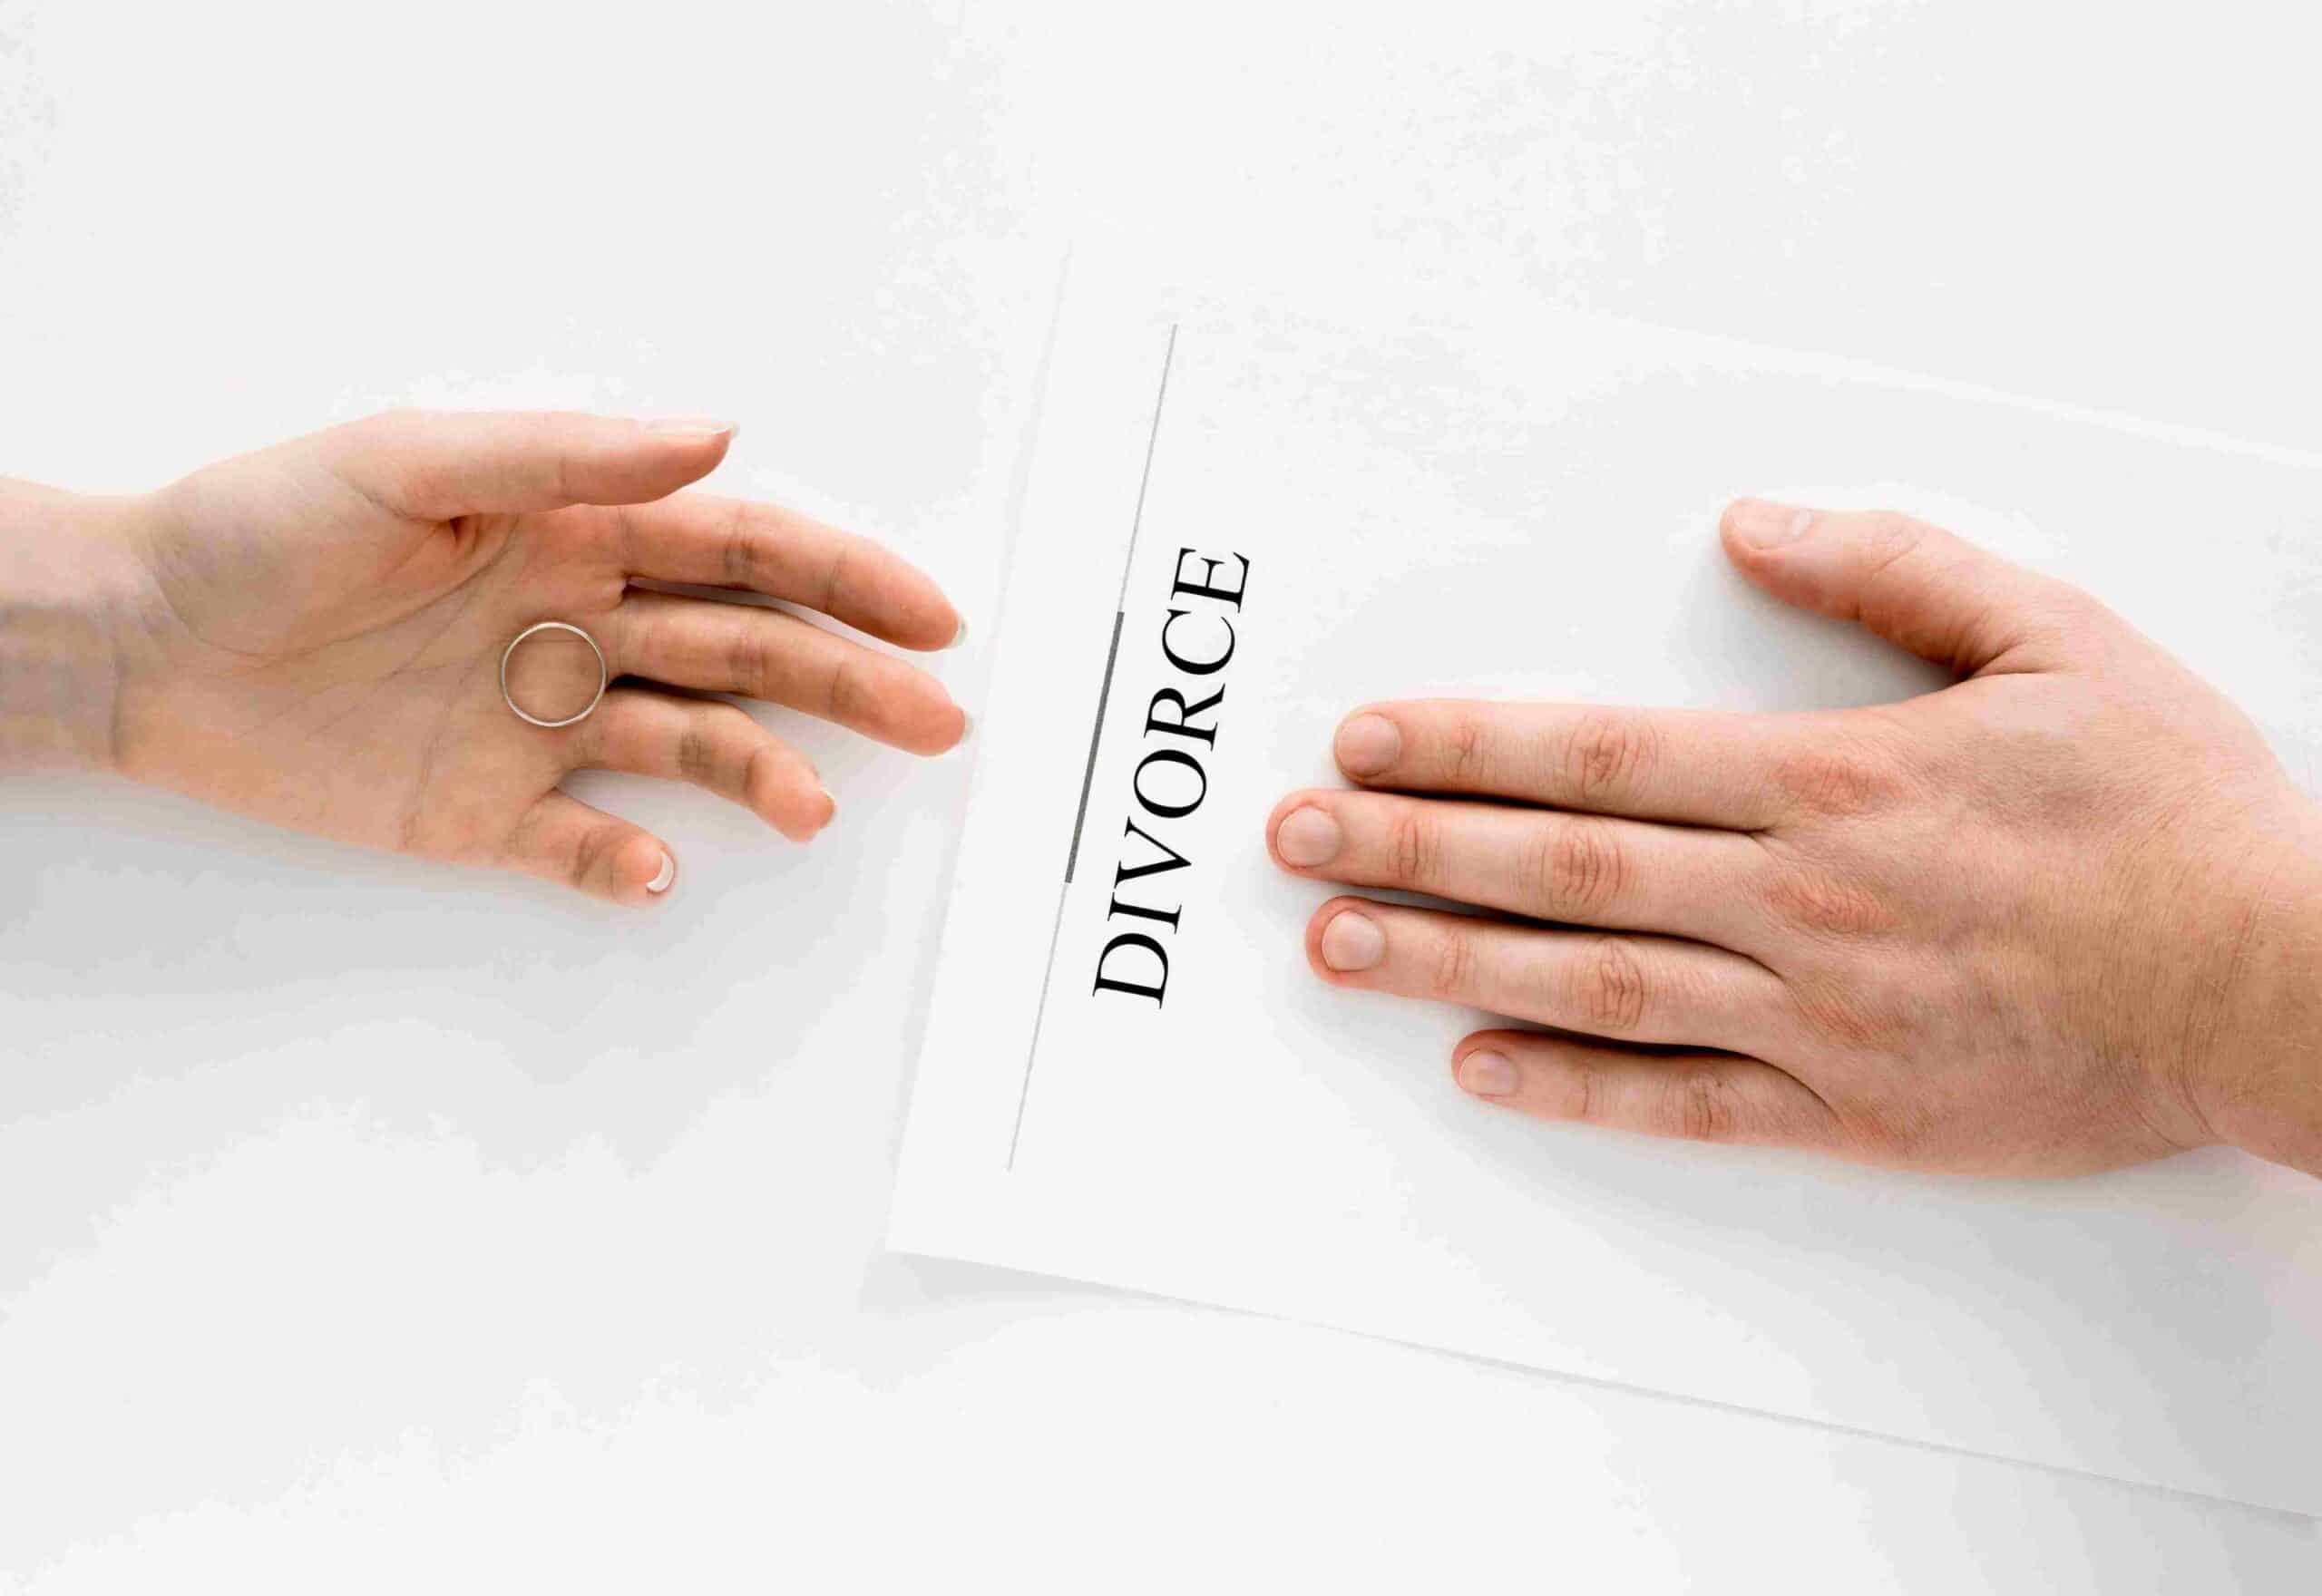 Does Florida Require a Waiting Period to Finalize a Divorce?